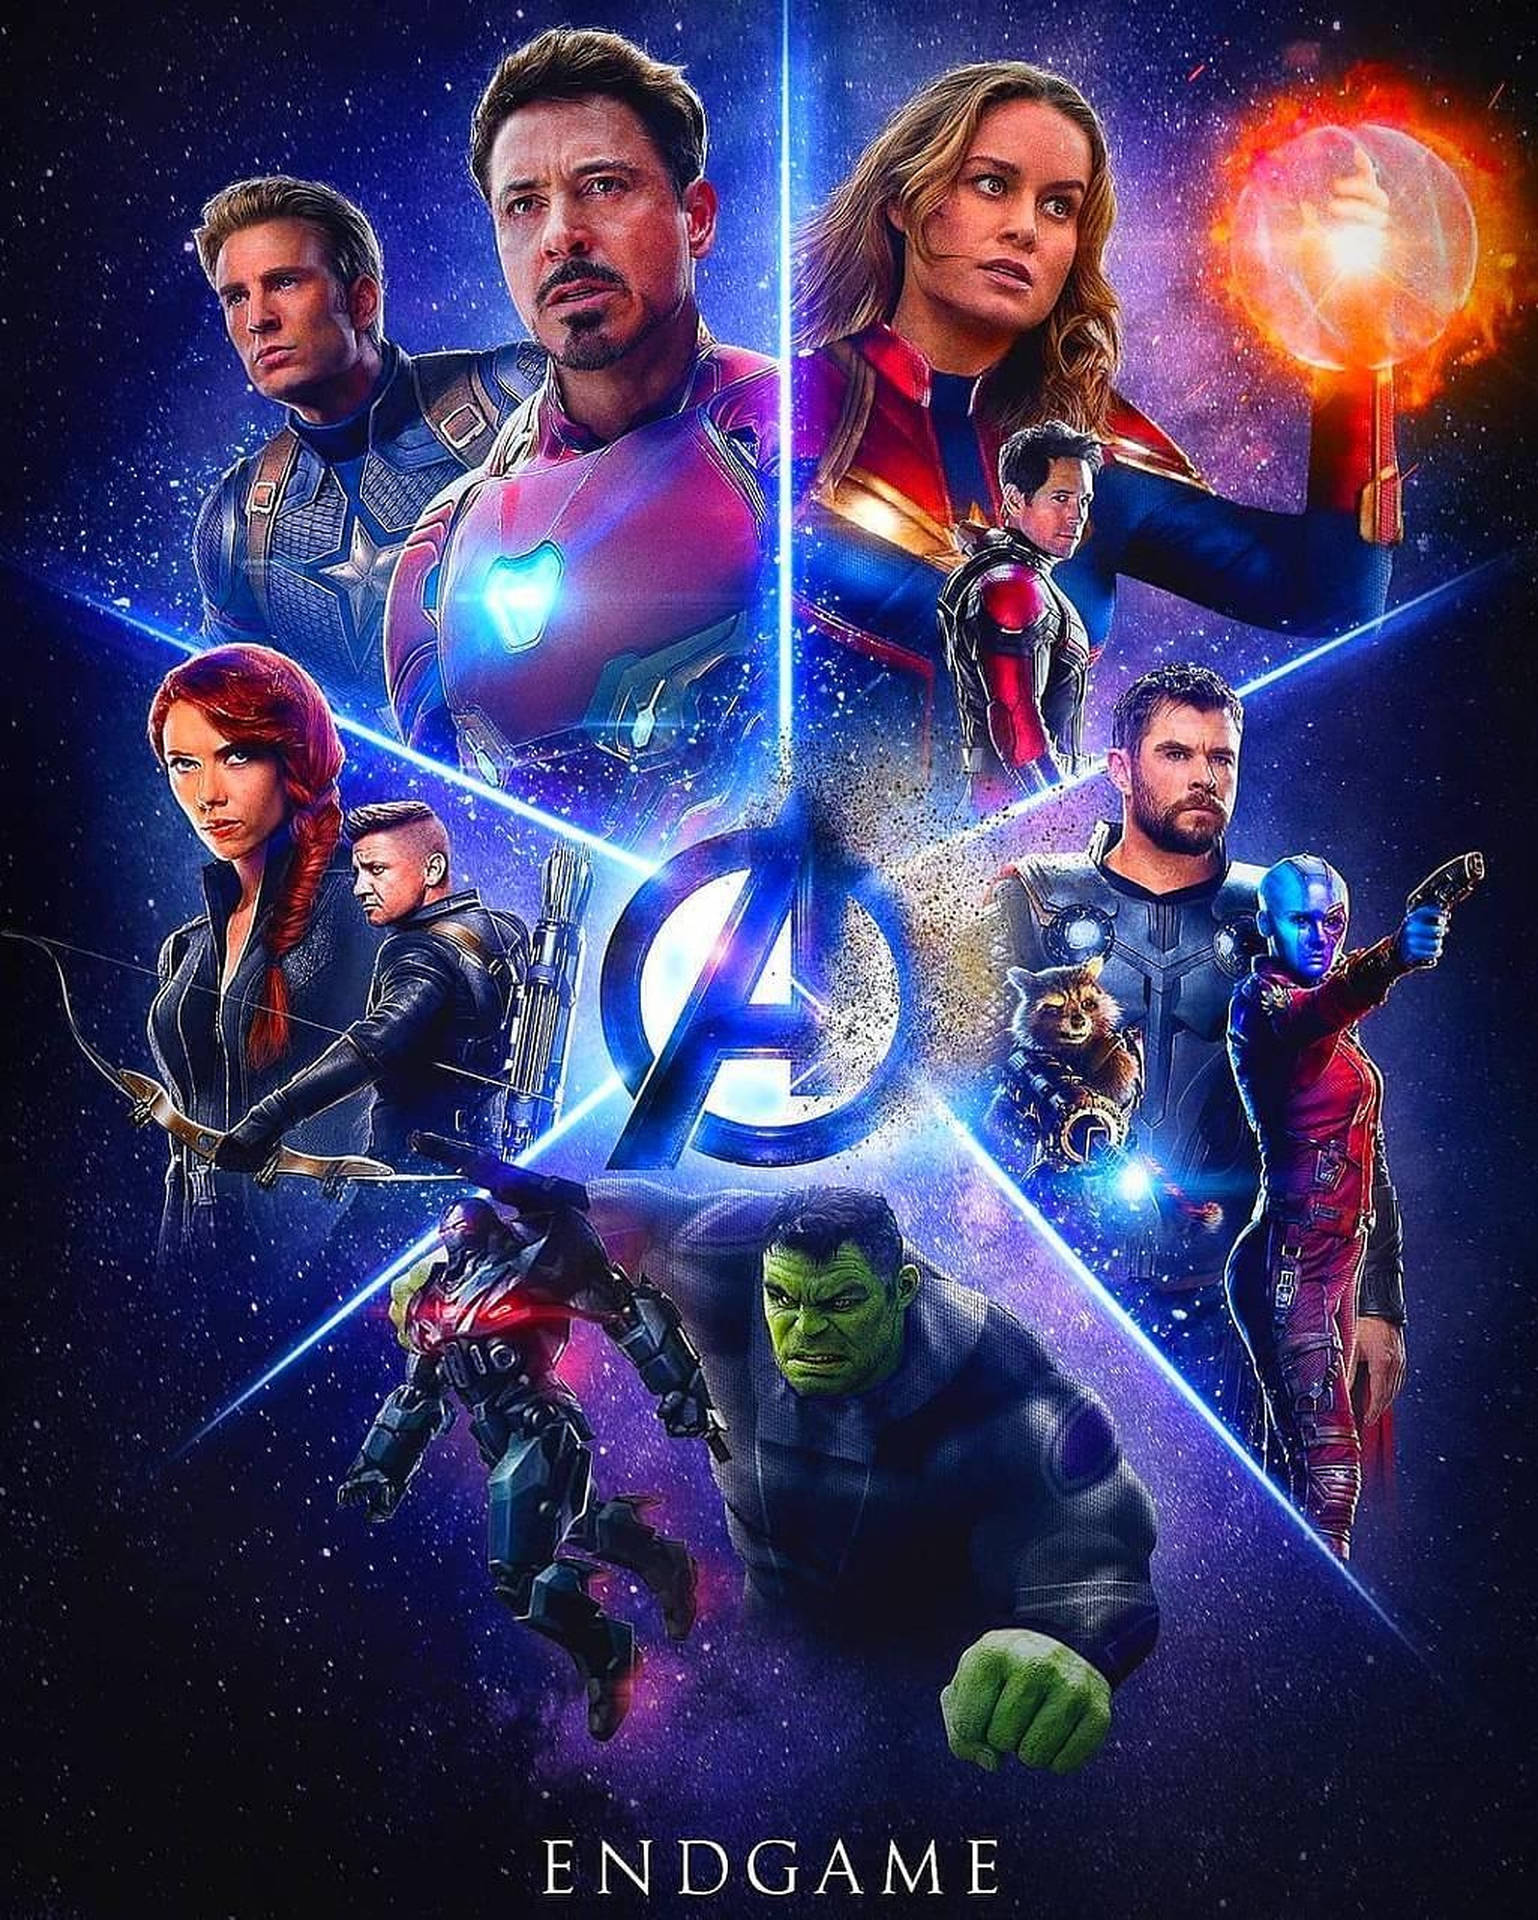 Free Avengers Android Wallpaper Downloads, [100+] Avengers Android  Wallpapers for FREE 